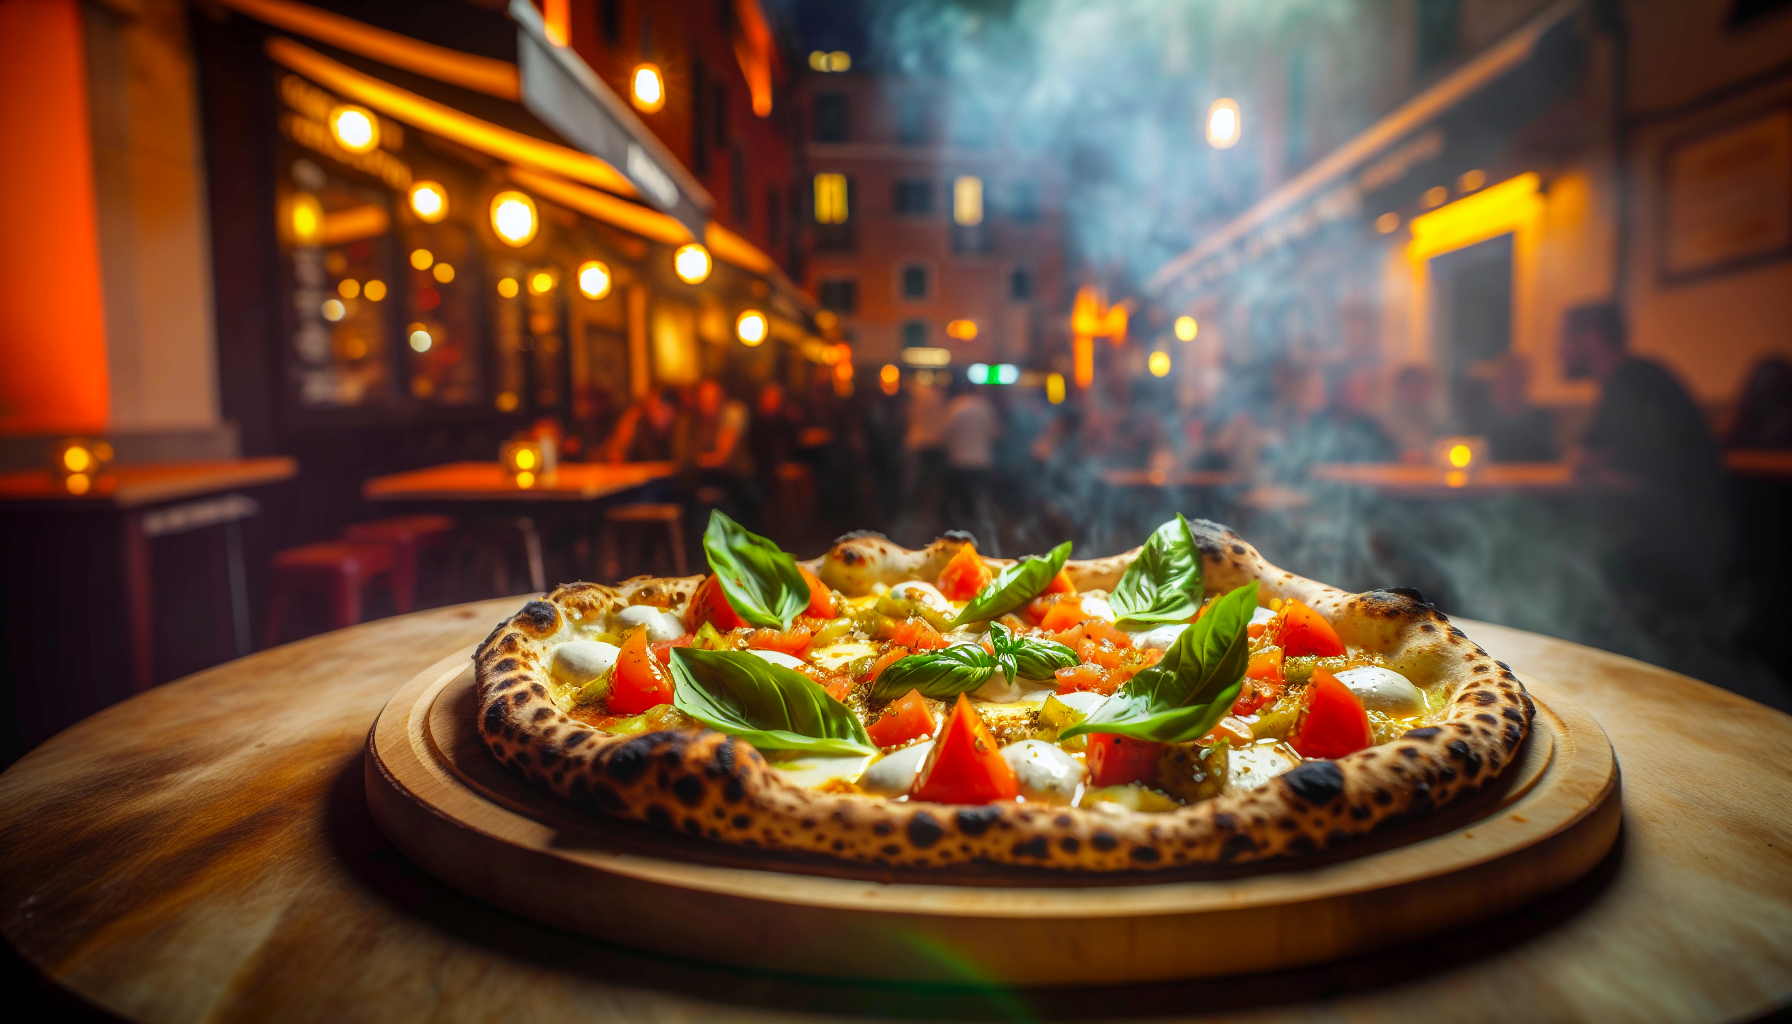 Gourmet wood-fired pizza with fresh toppings